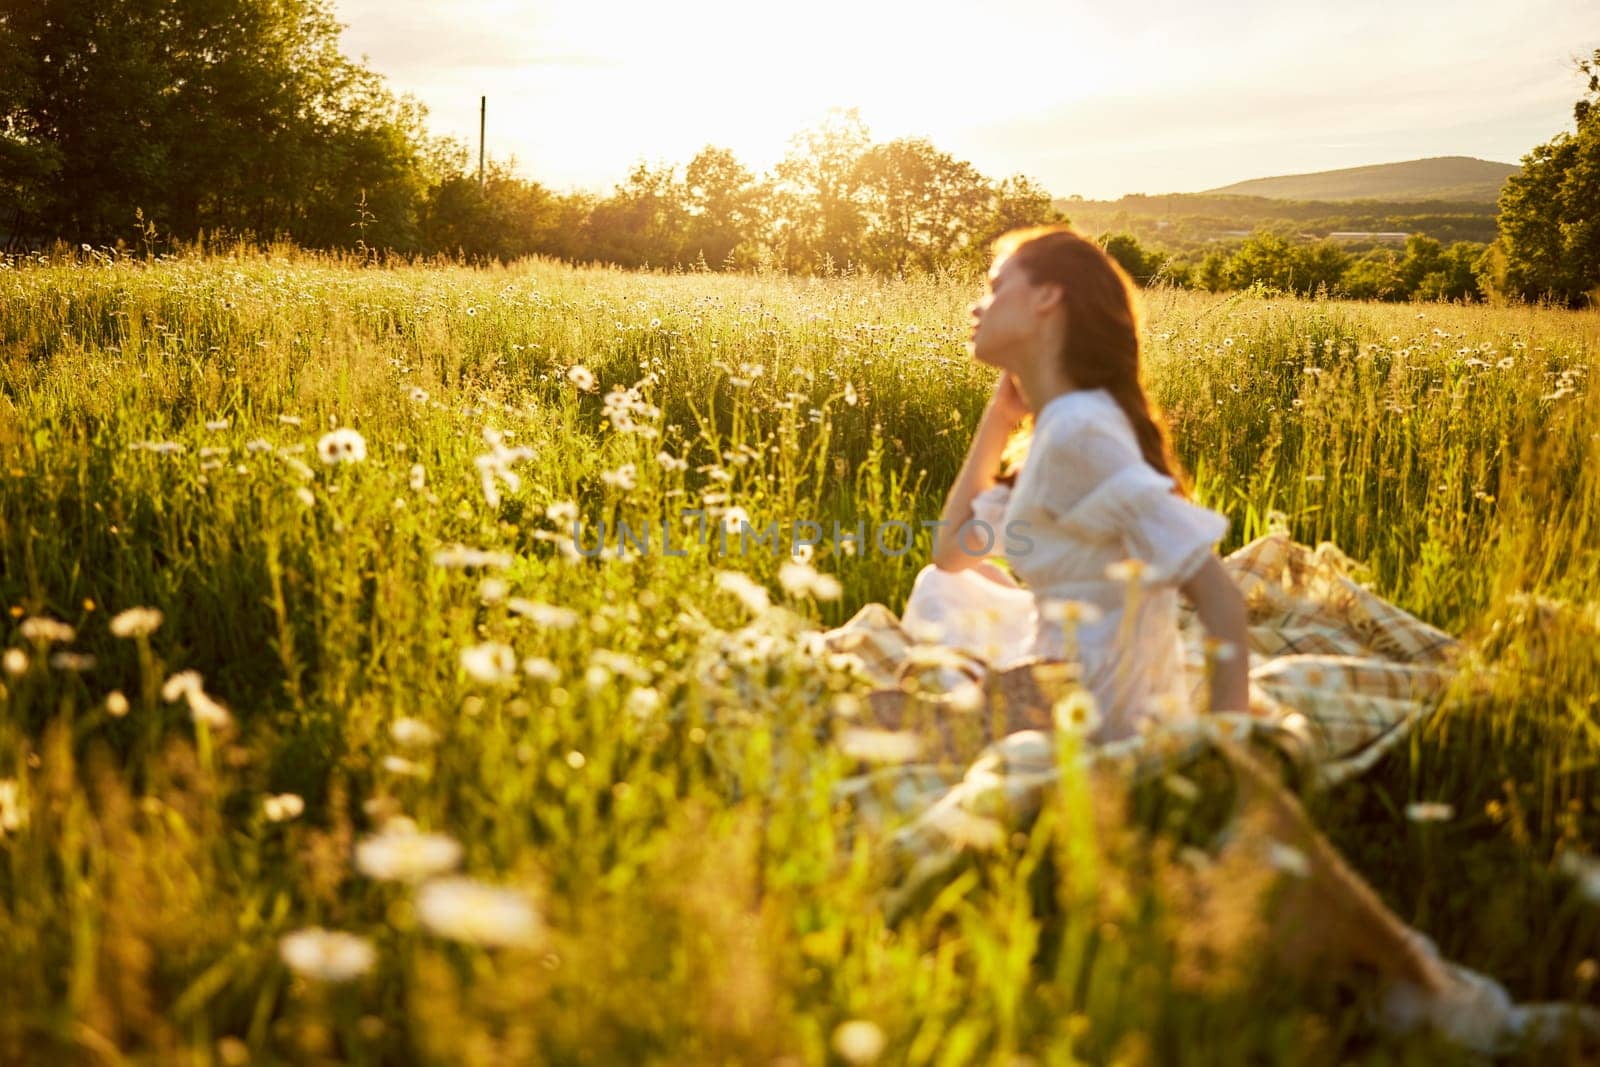 woman sitting in a field with daisies in a light dress out of focus by Vichizh